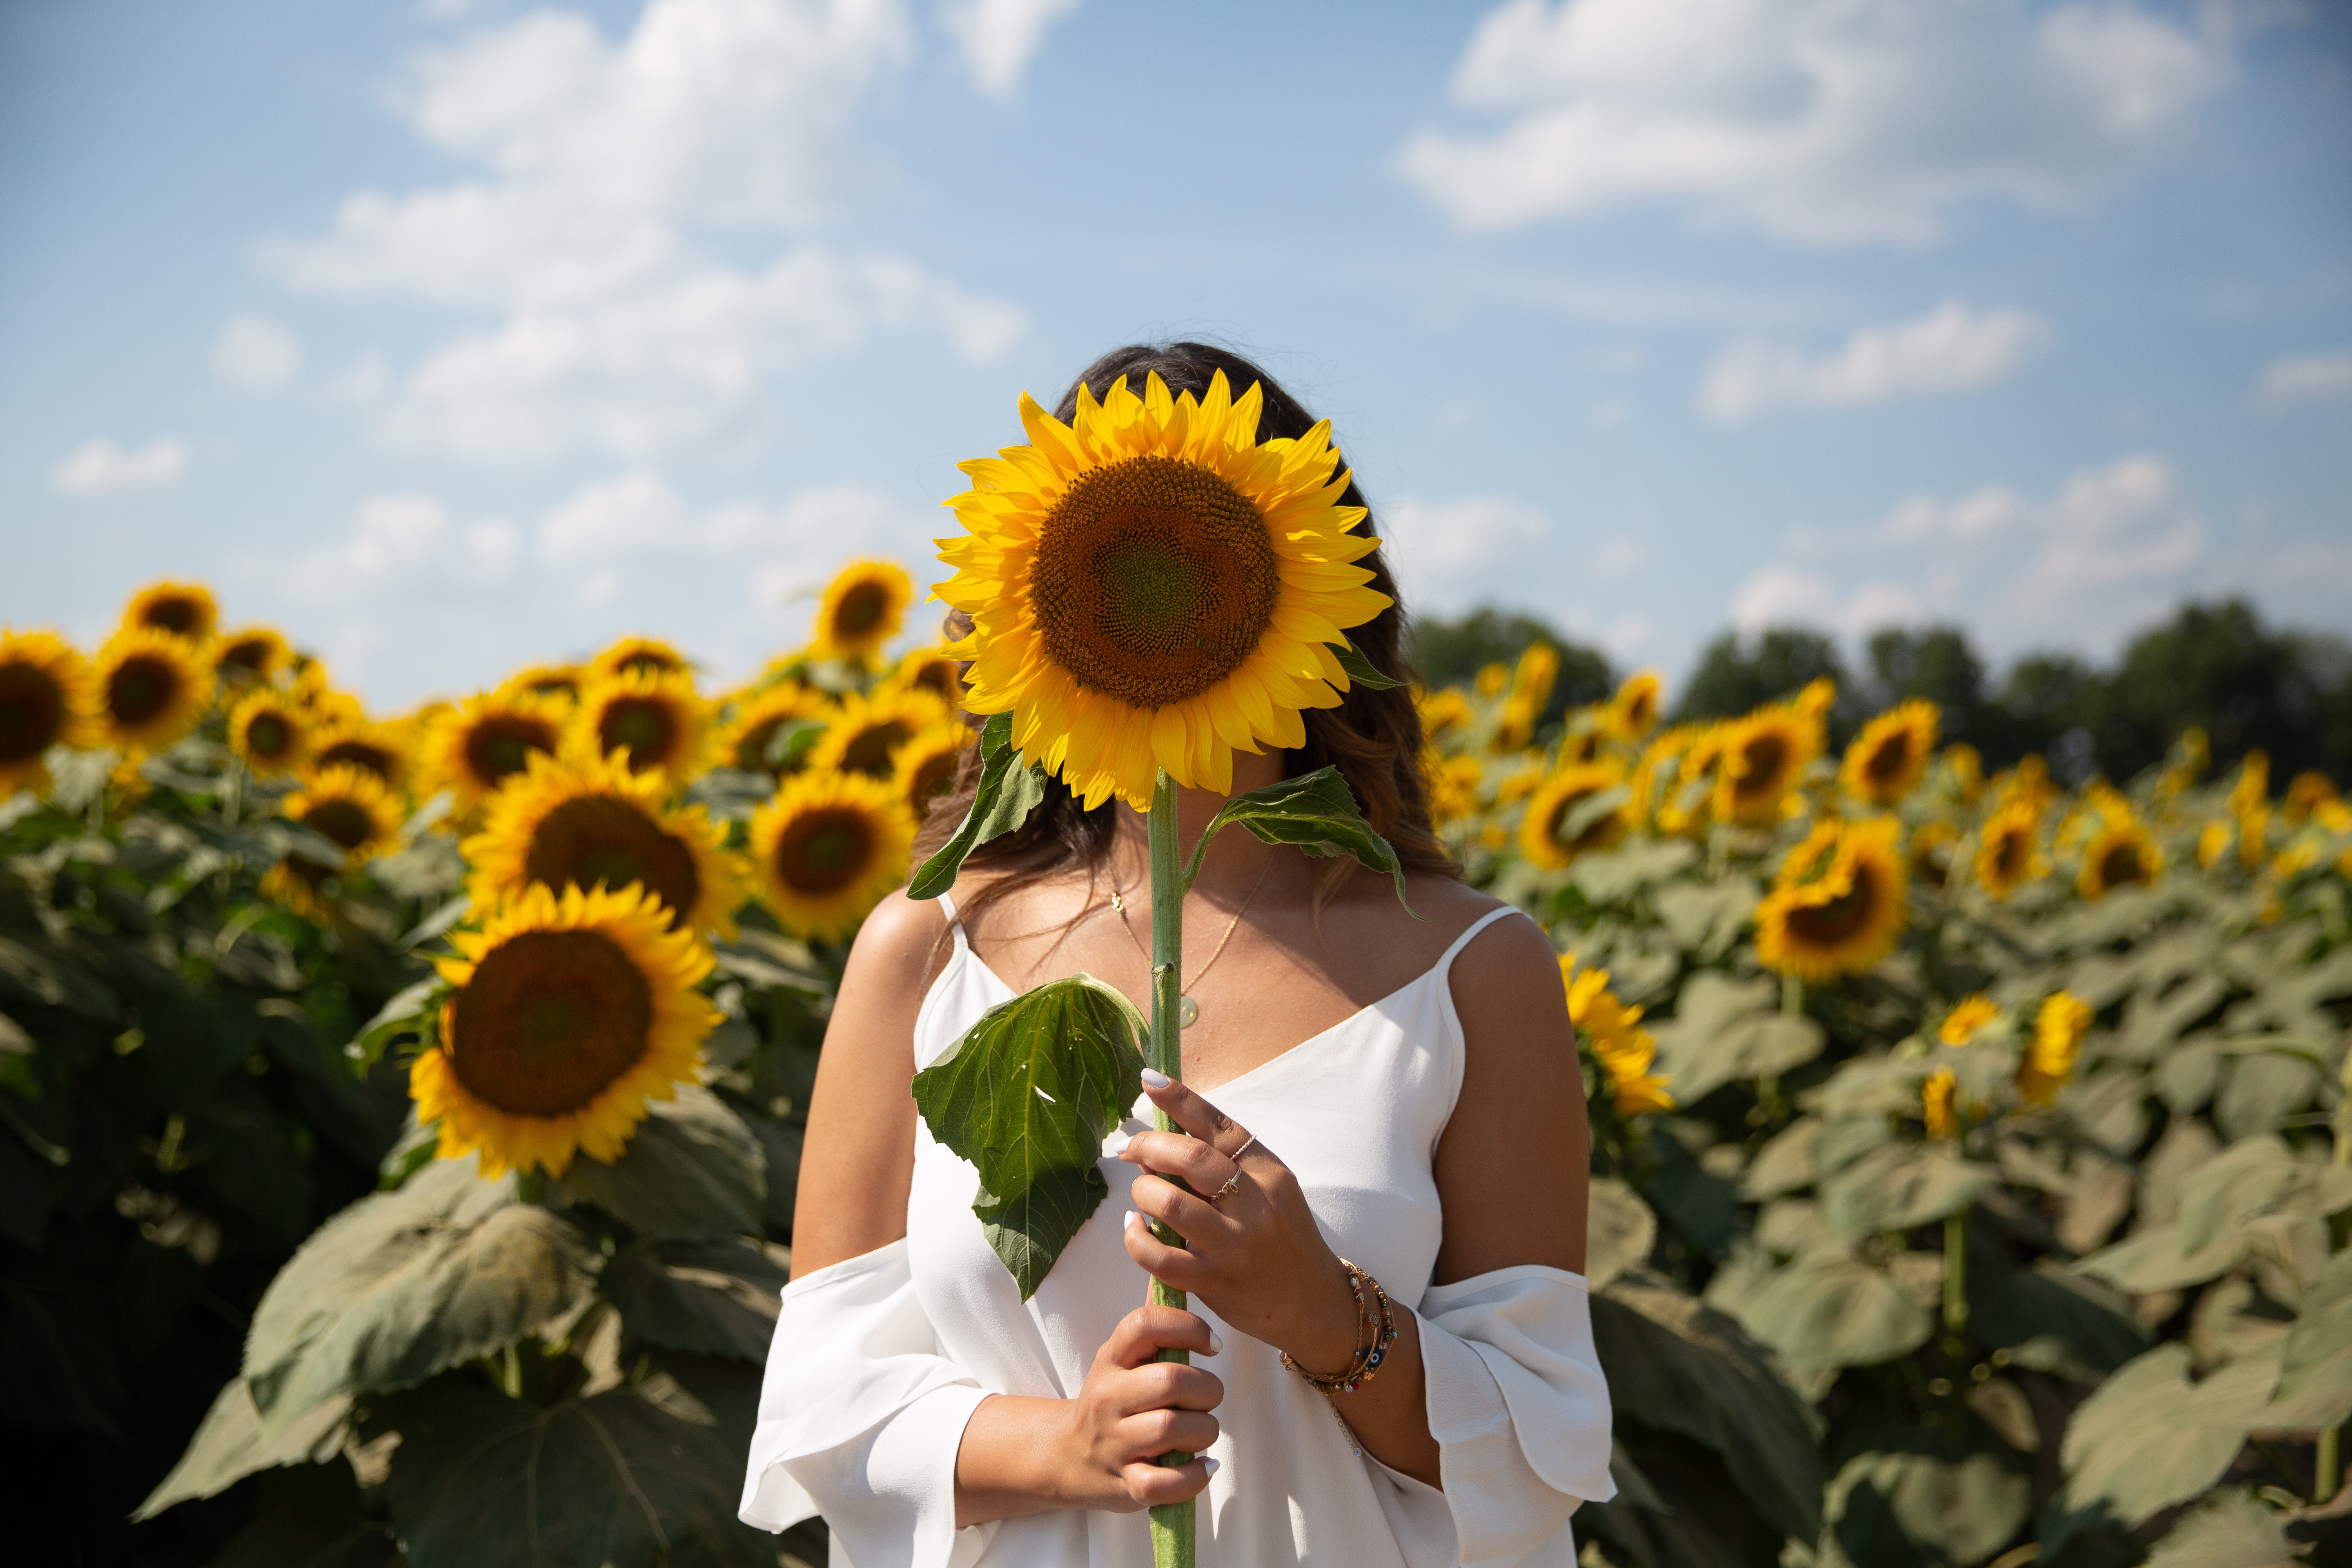 Person Holding A Sunflower Over Their Face